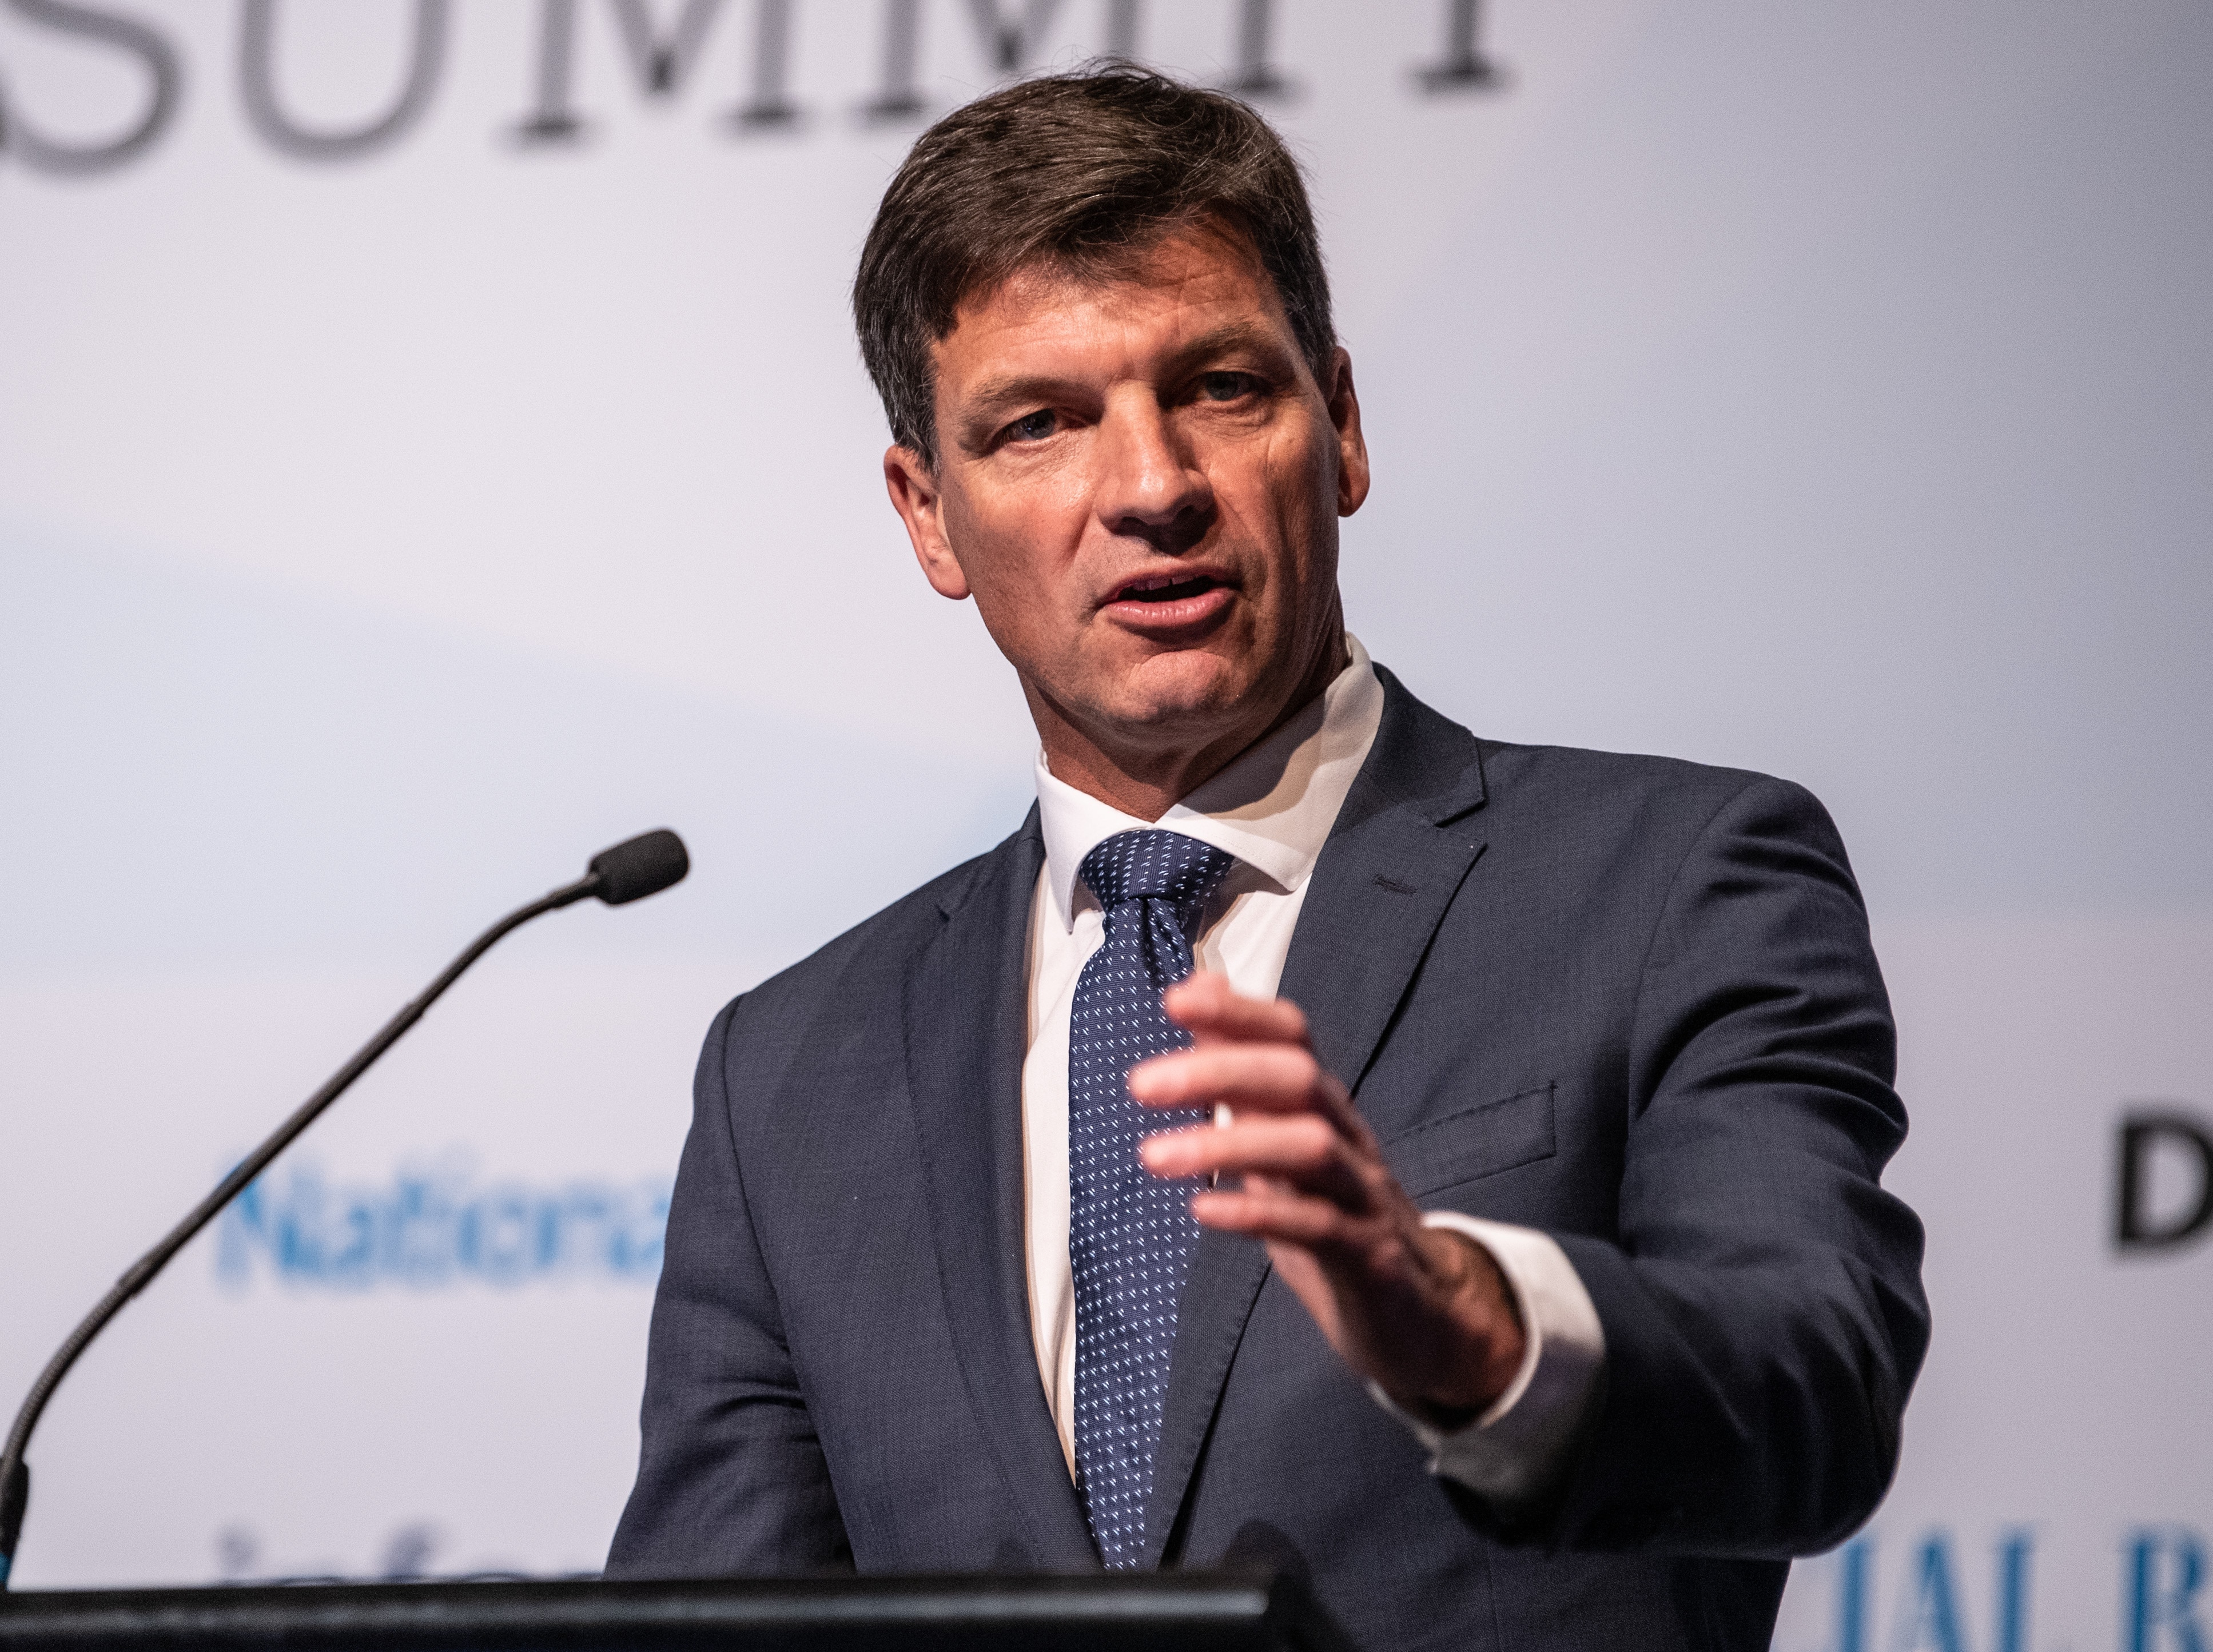 Minister for Energy Angus Taylor delivering the keynote address at the Financial Review National Energy Summit in Sydney.